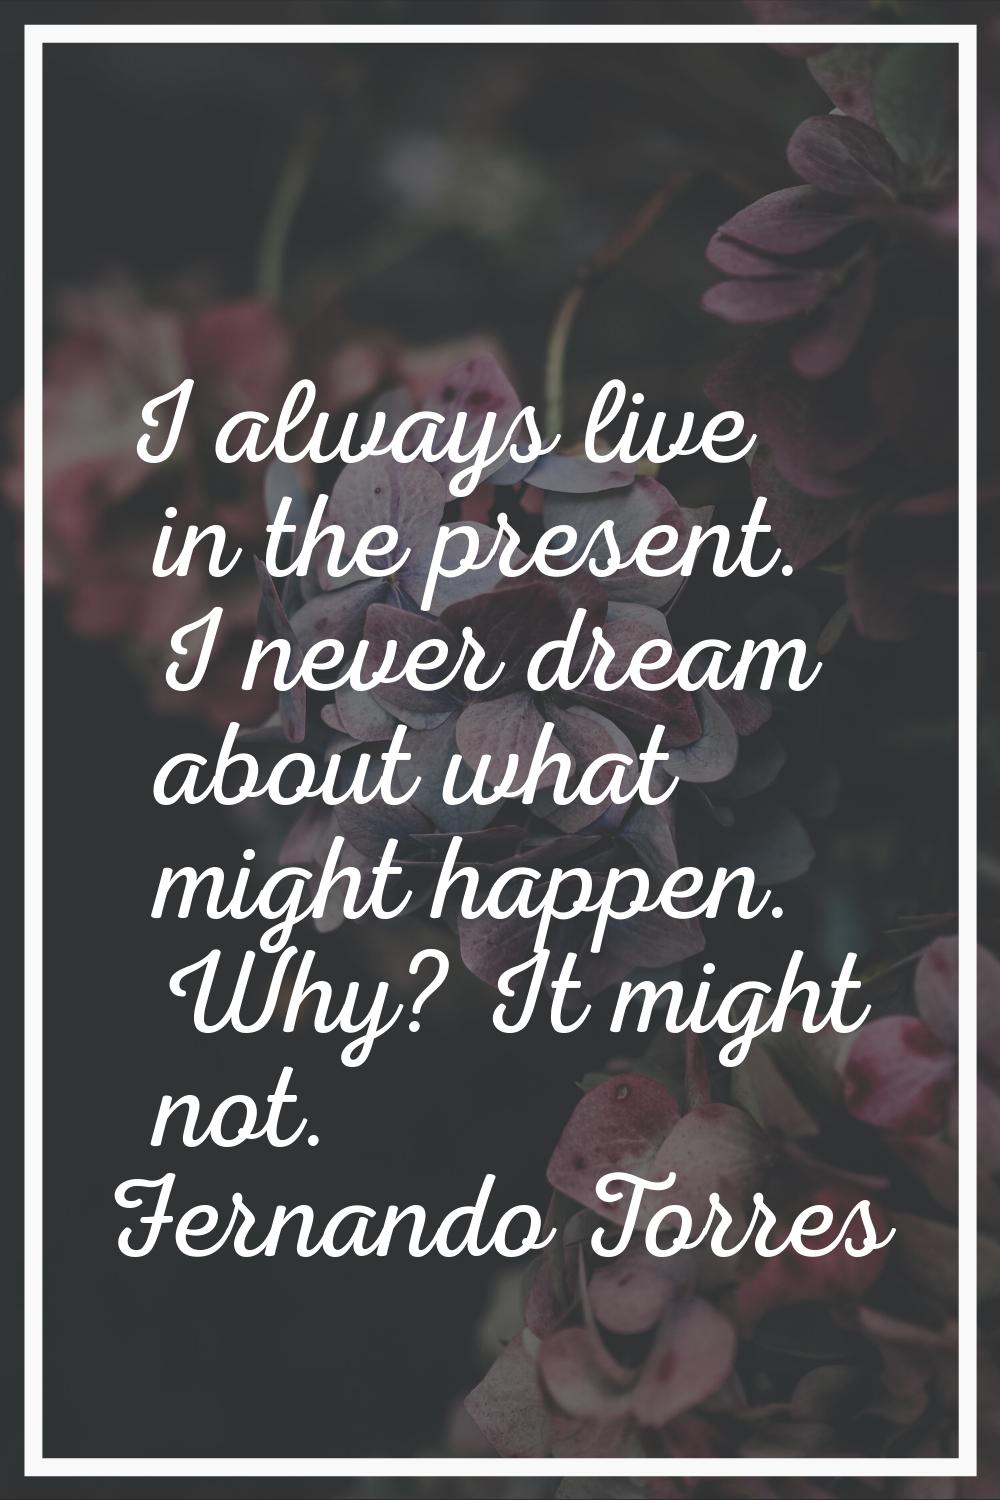 I always live in the present. I never dream about what might happen. Why? It might not.